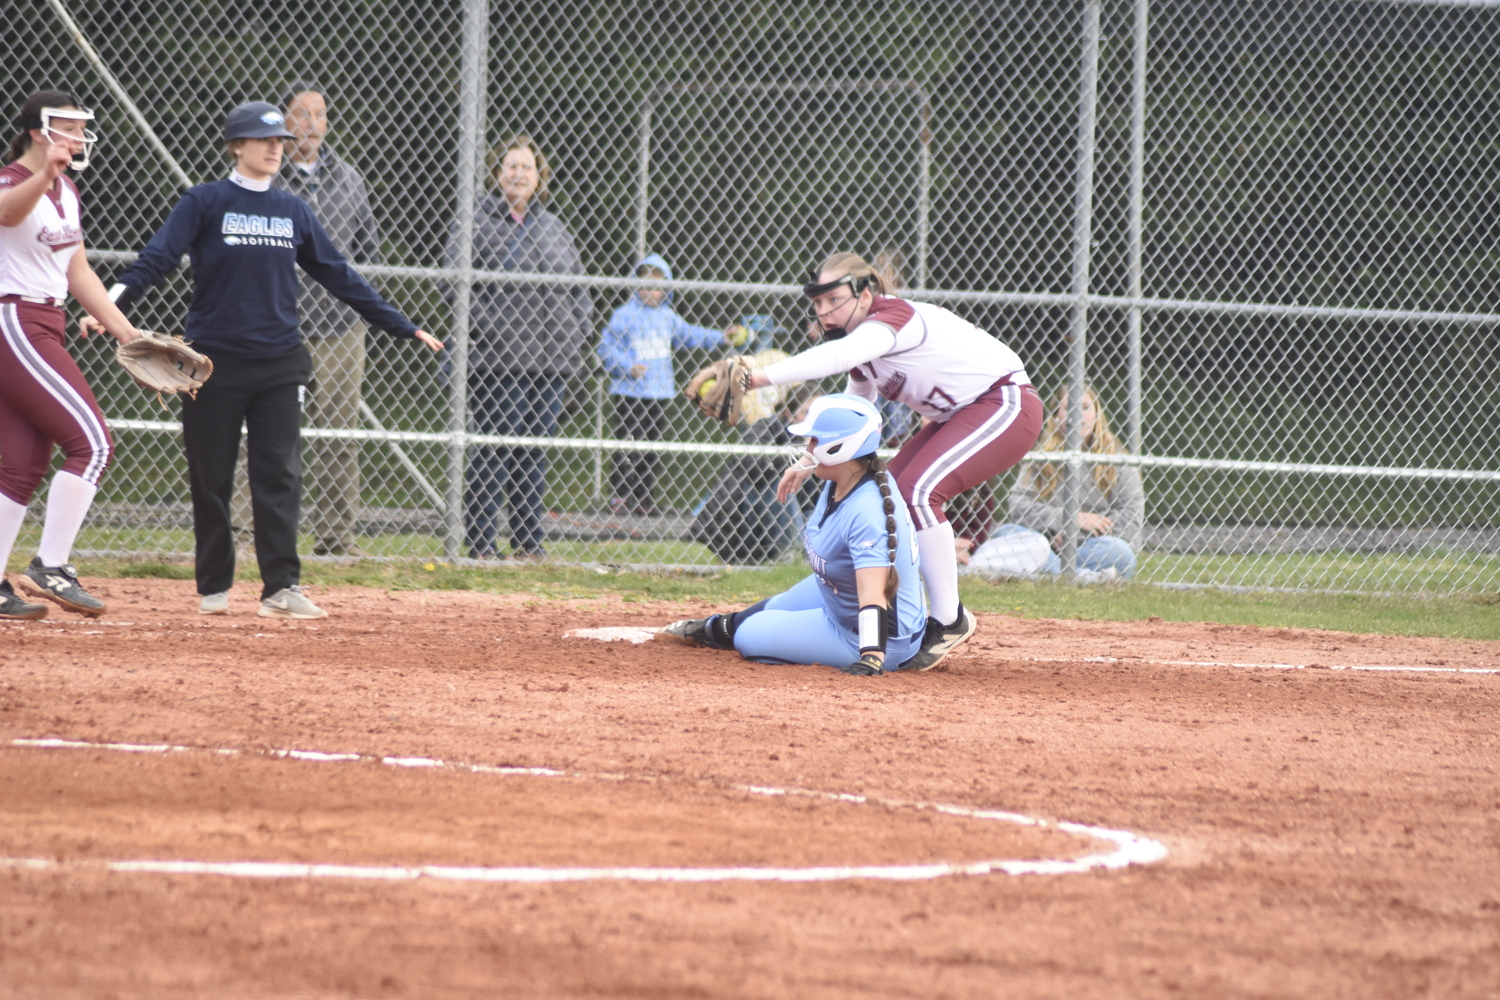 East Hampton junior Susie DiSunno tries to tag out a Rocky Point player at third base. DREW BUDD